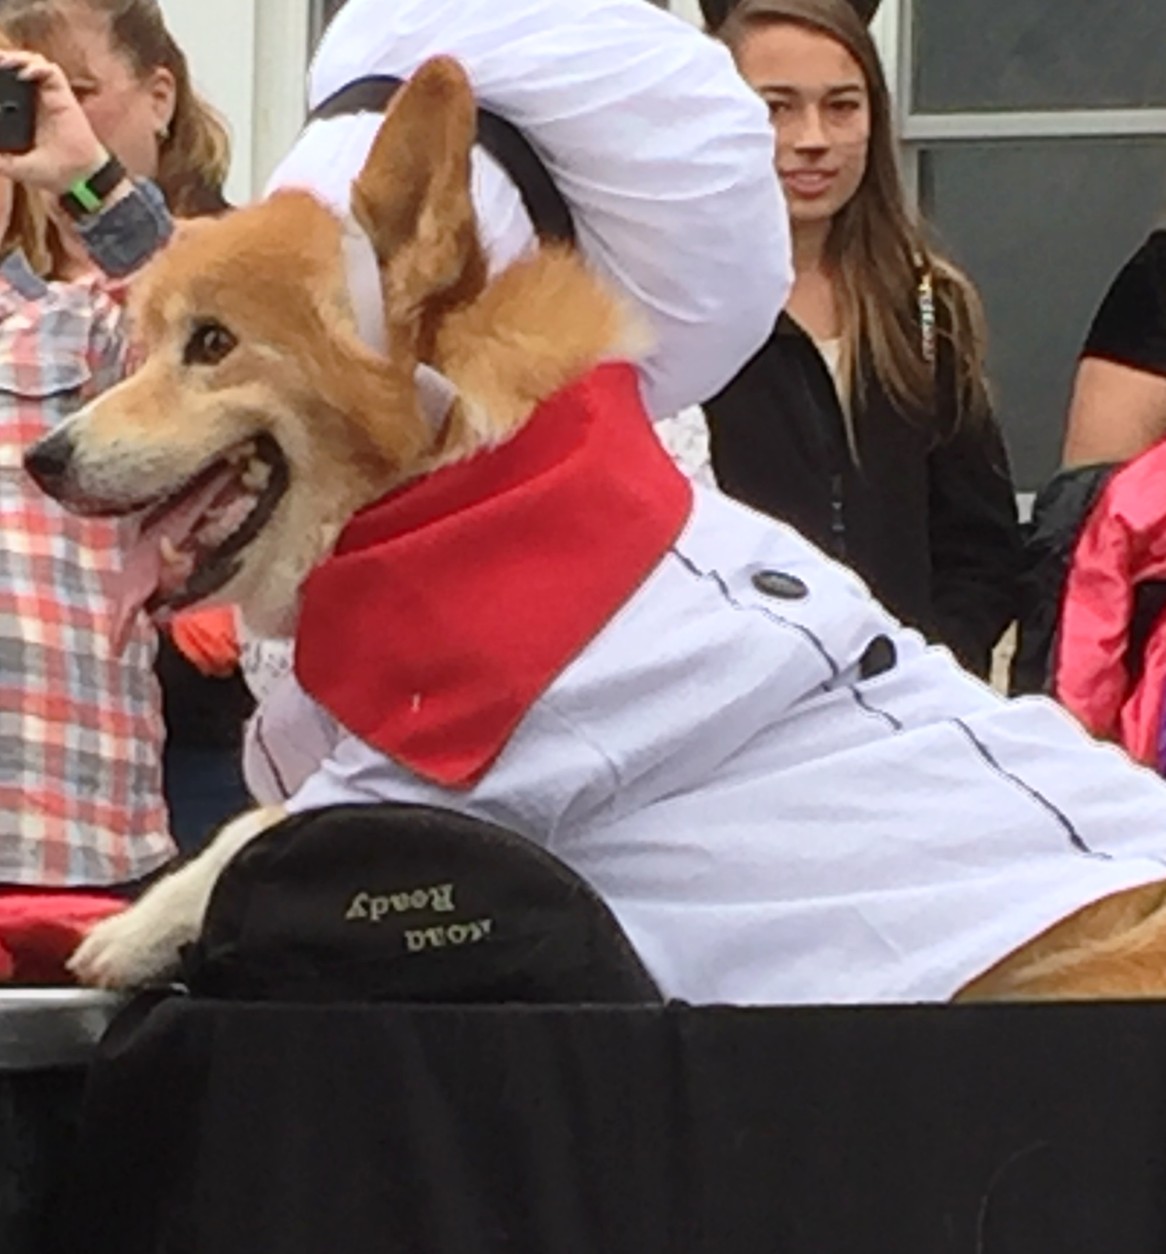 Dogs in costume turned out for the Sea Witch Monsters Parade 2015 in Rehoboth, Delaware. (WTOP/Molly Welton)